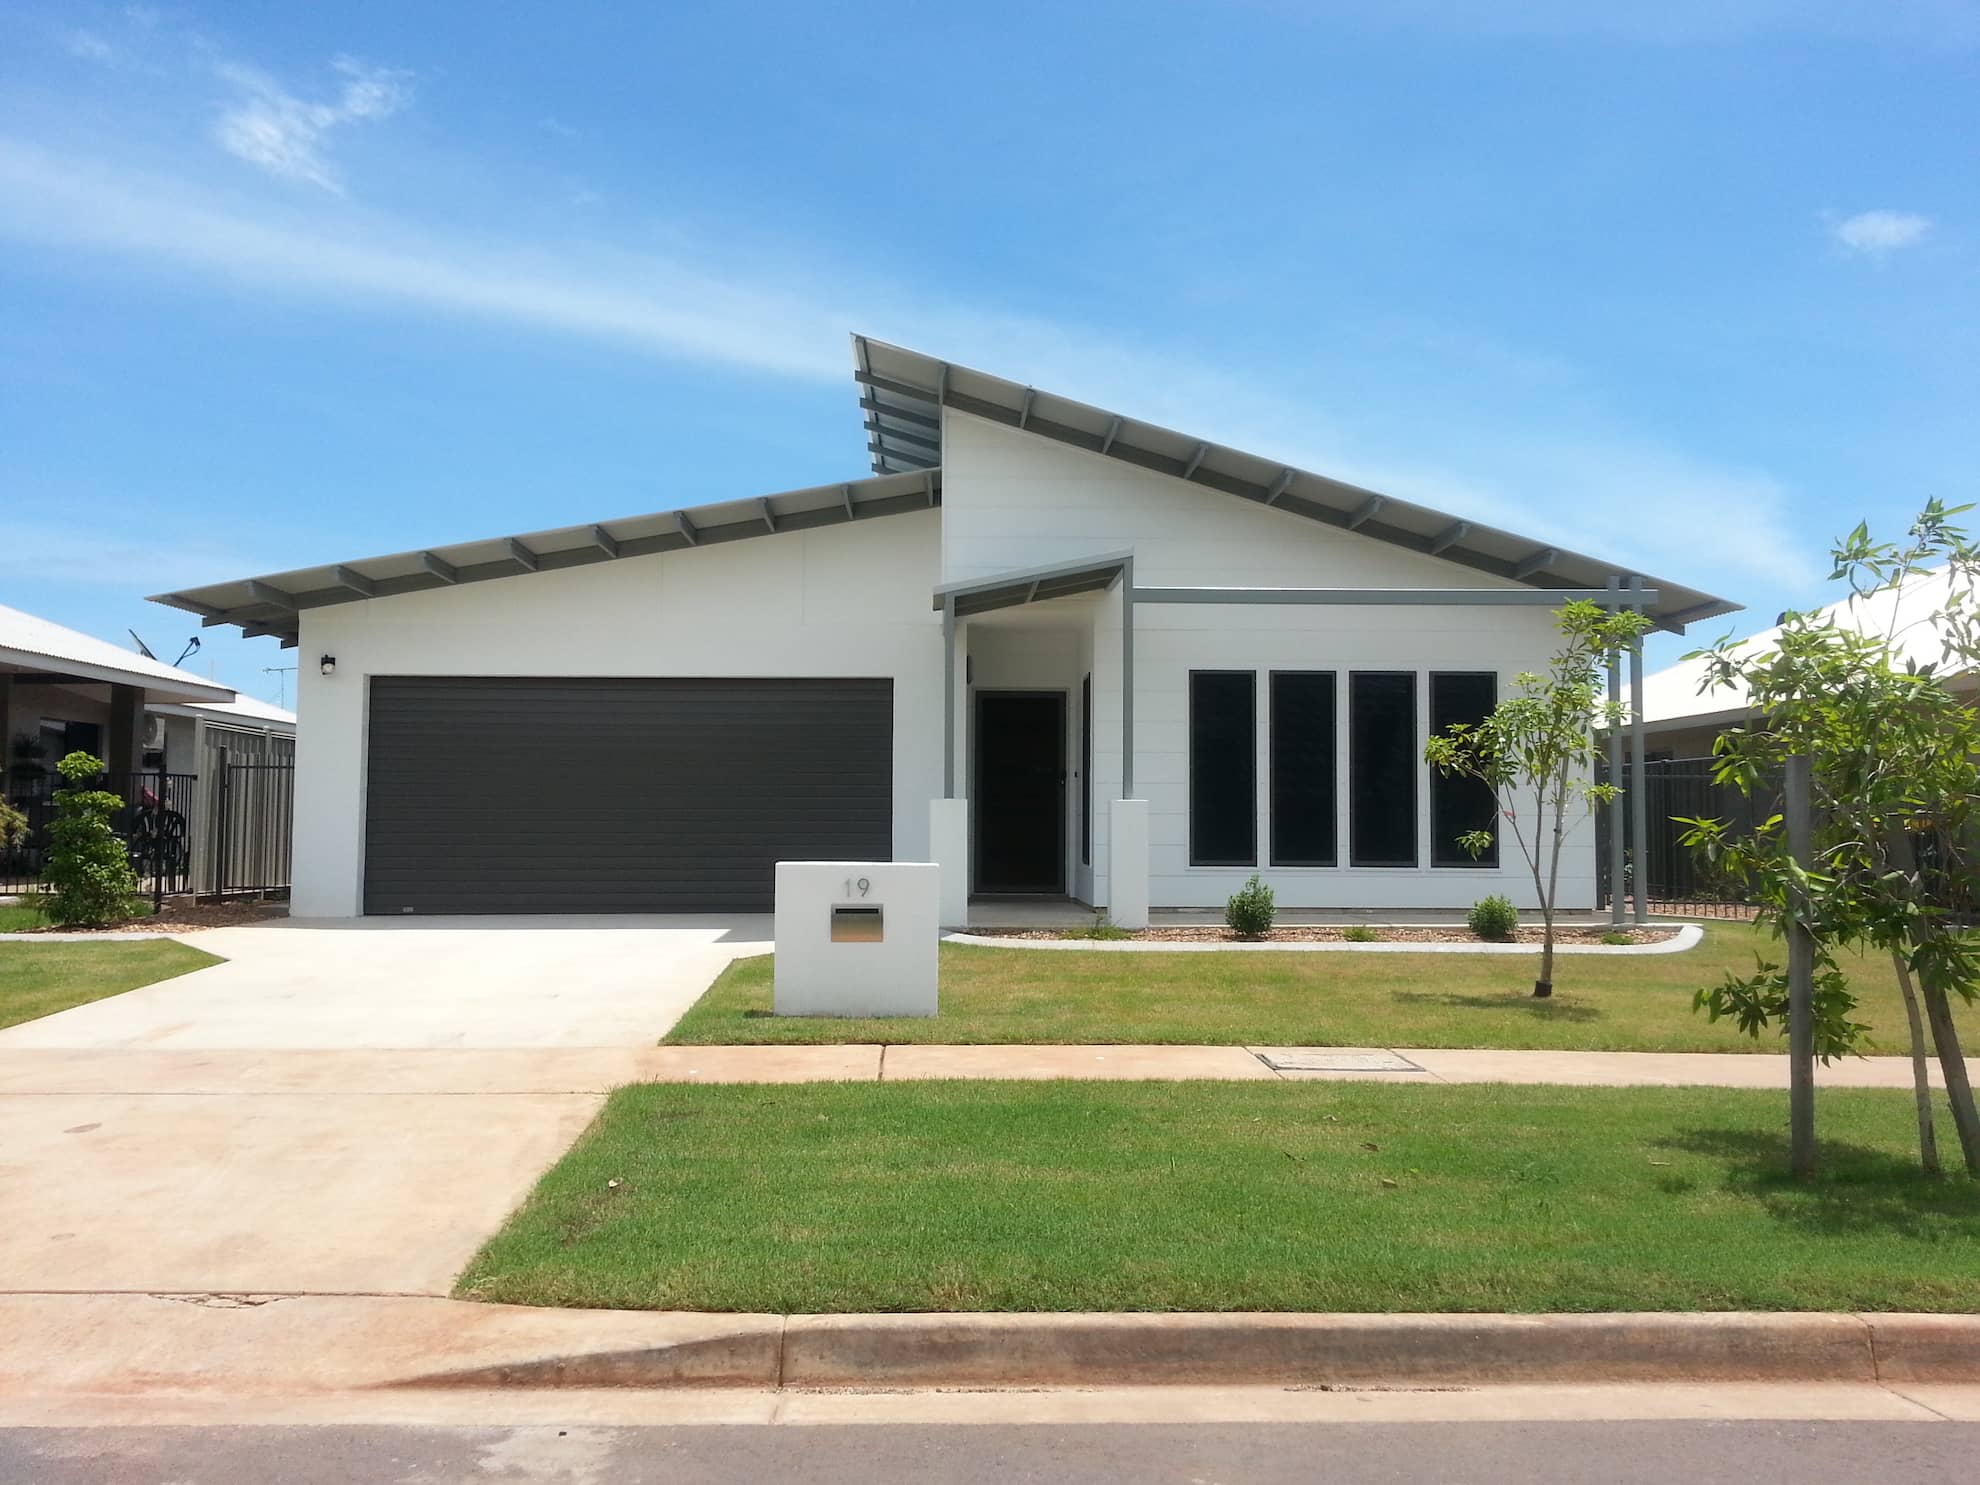 Defence Housing project by mdesign, a building design practice that operates on the Sunshine Coast.